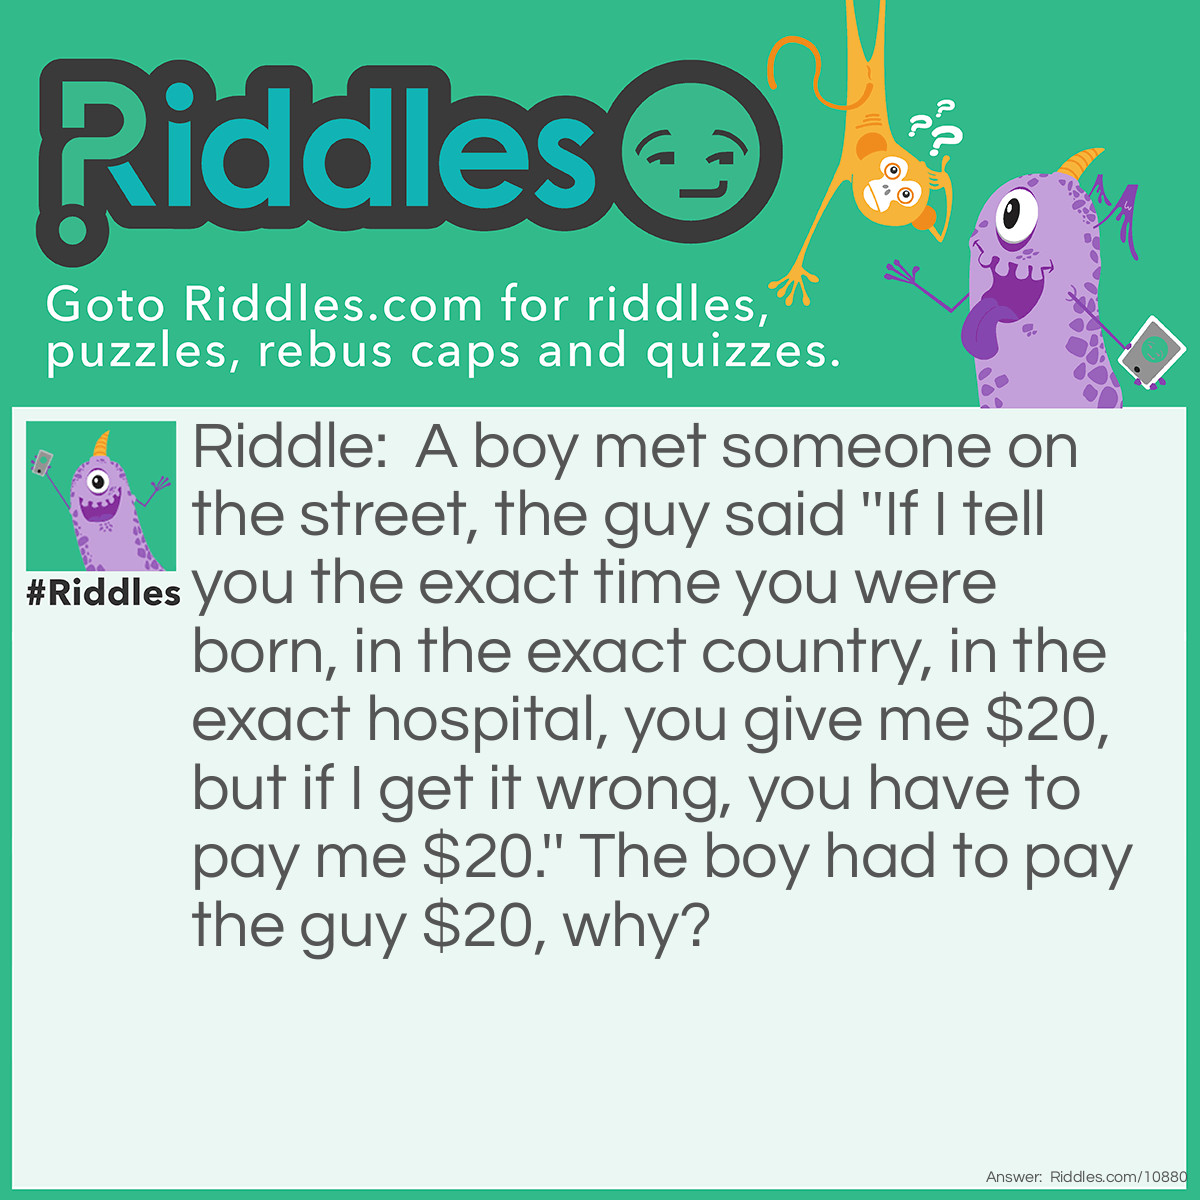 Riddle: A boy met someone on the street, the guy said ''If I tell you the exact time you were born, in the exact country, in the exact hospital, you give me $20, but if I get it wrong, you have to pay me $20.'' The boy had to pay the guy $20, why? Answer: The guy told the truth, he said ''The exact time you were born, in the exact country, in the exact hospital''.